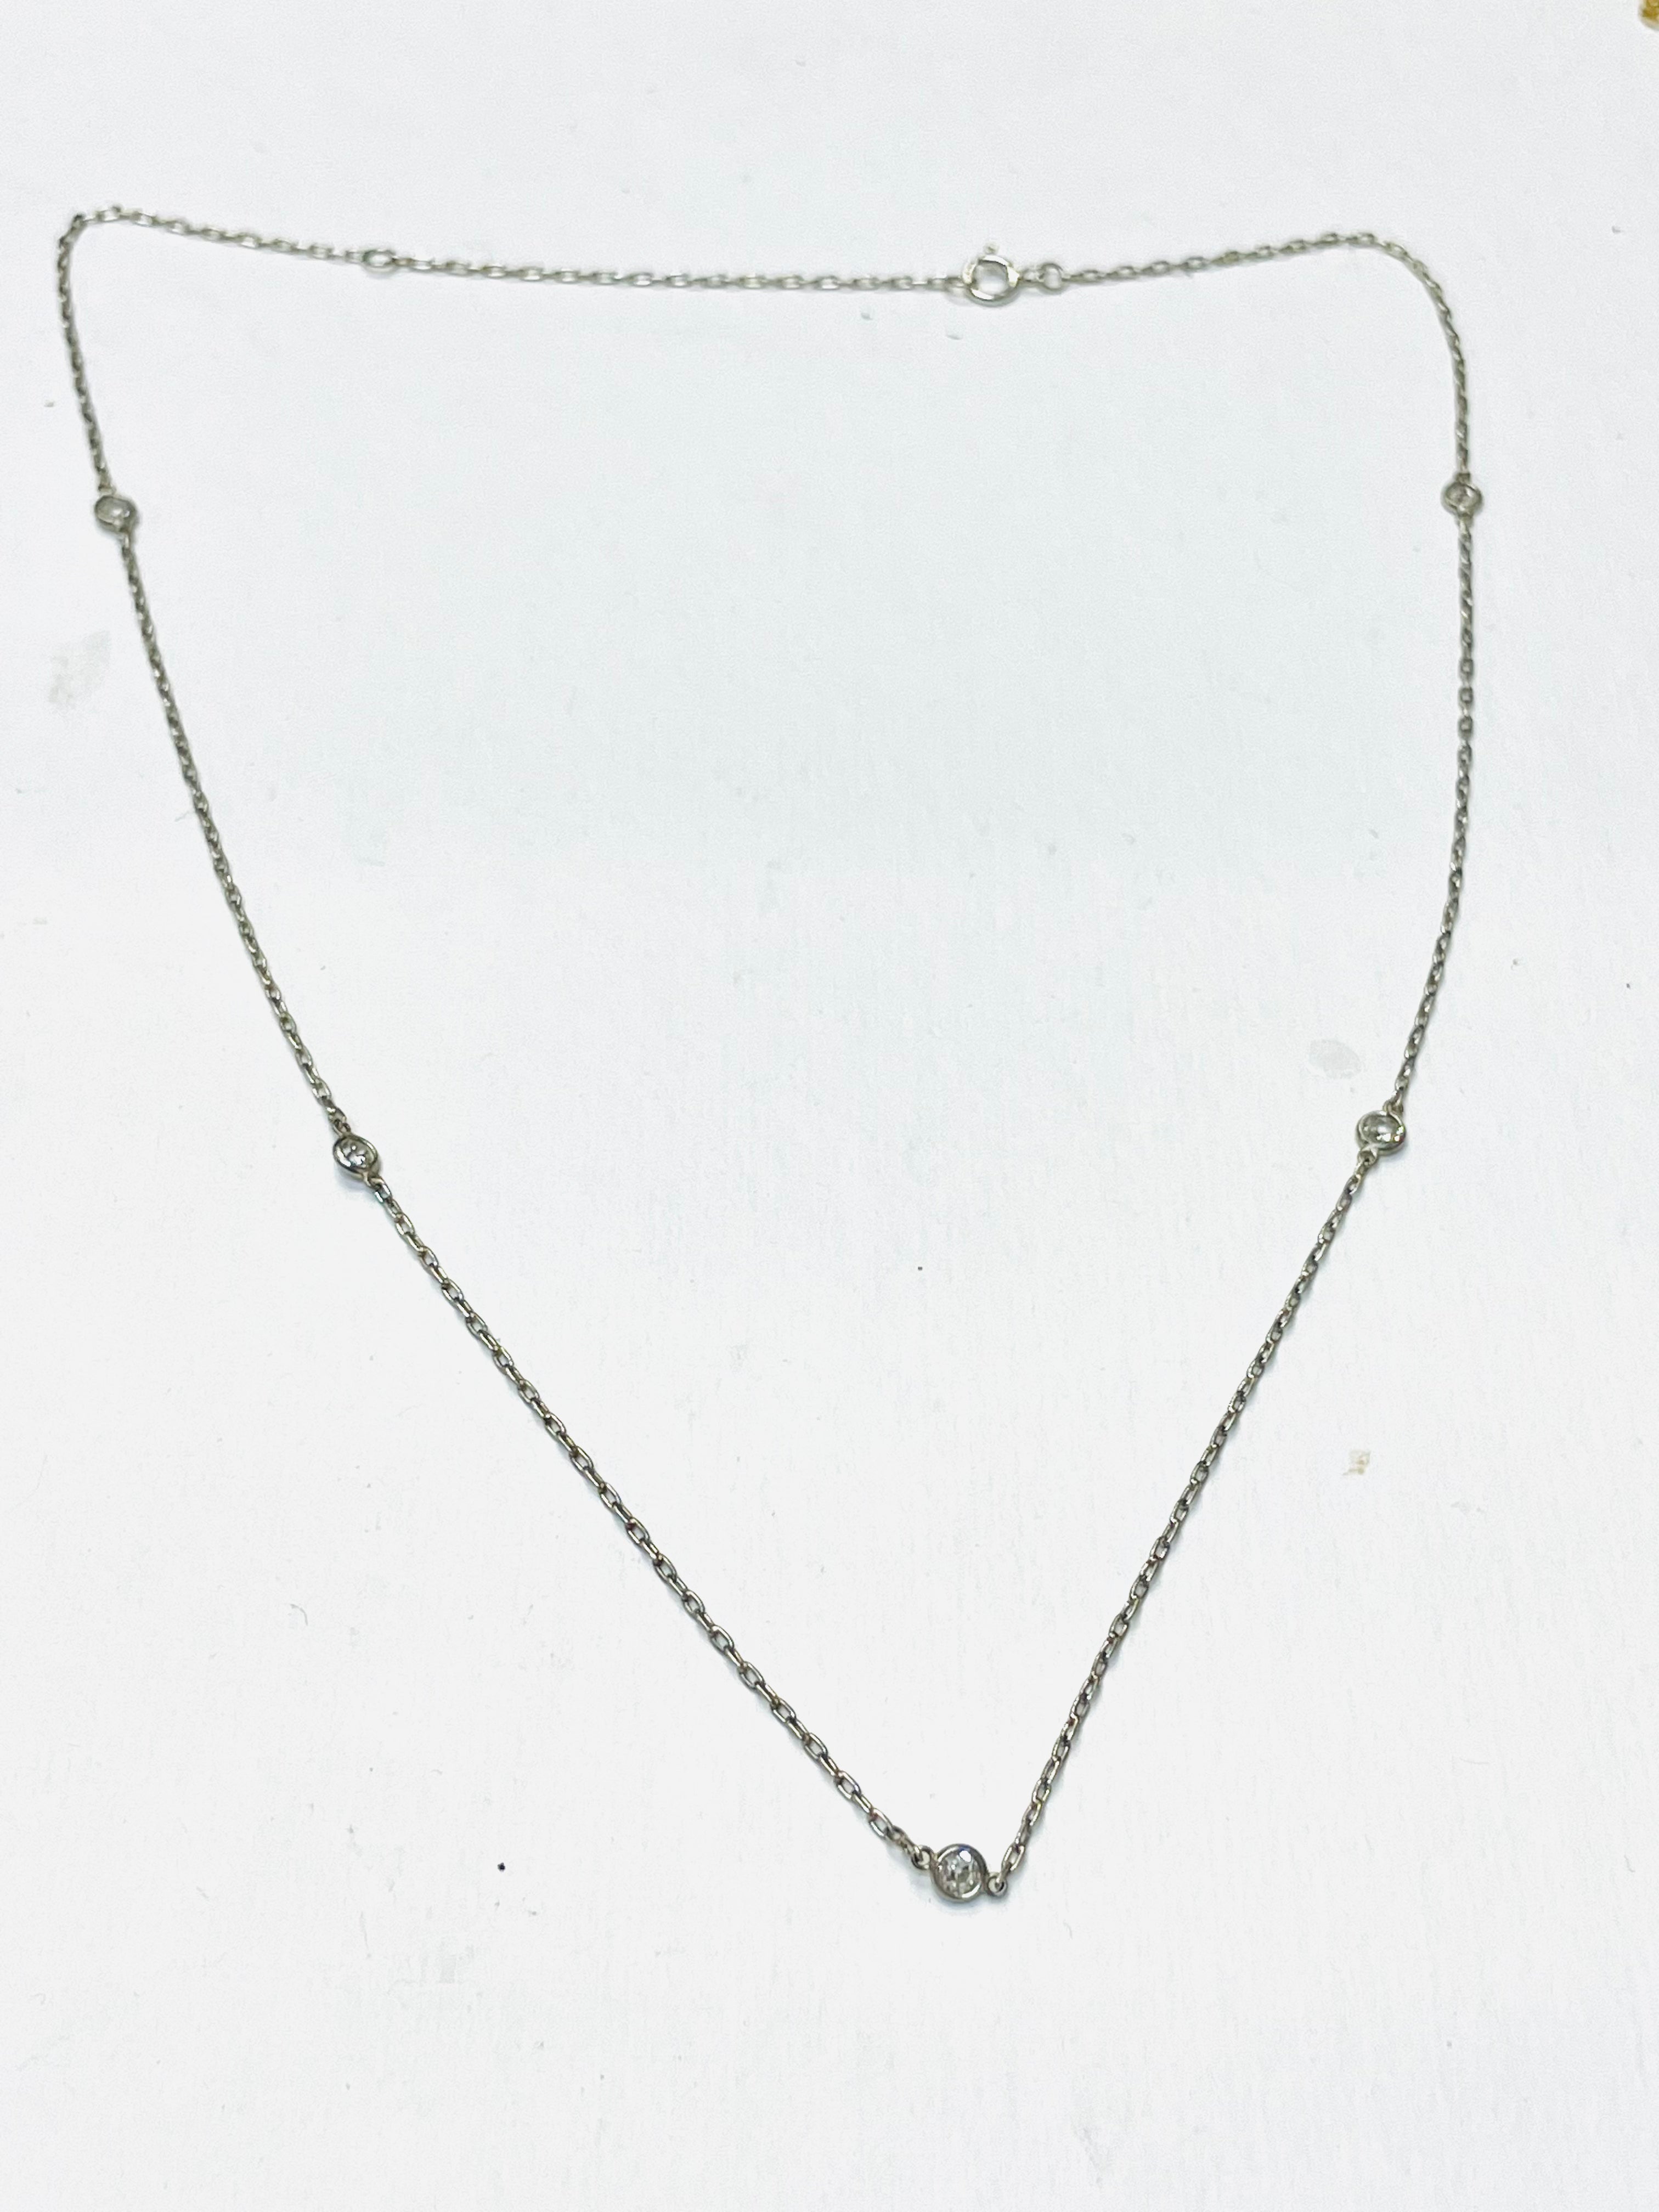 .47CT Old Mine Cut Diamond Platinum by the Yard Necklace 16-18”